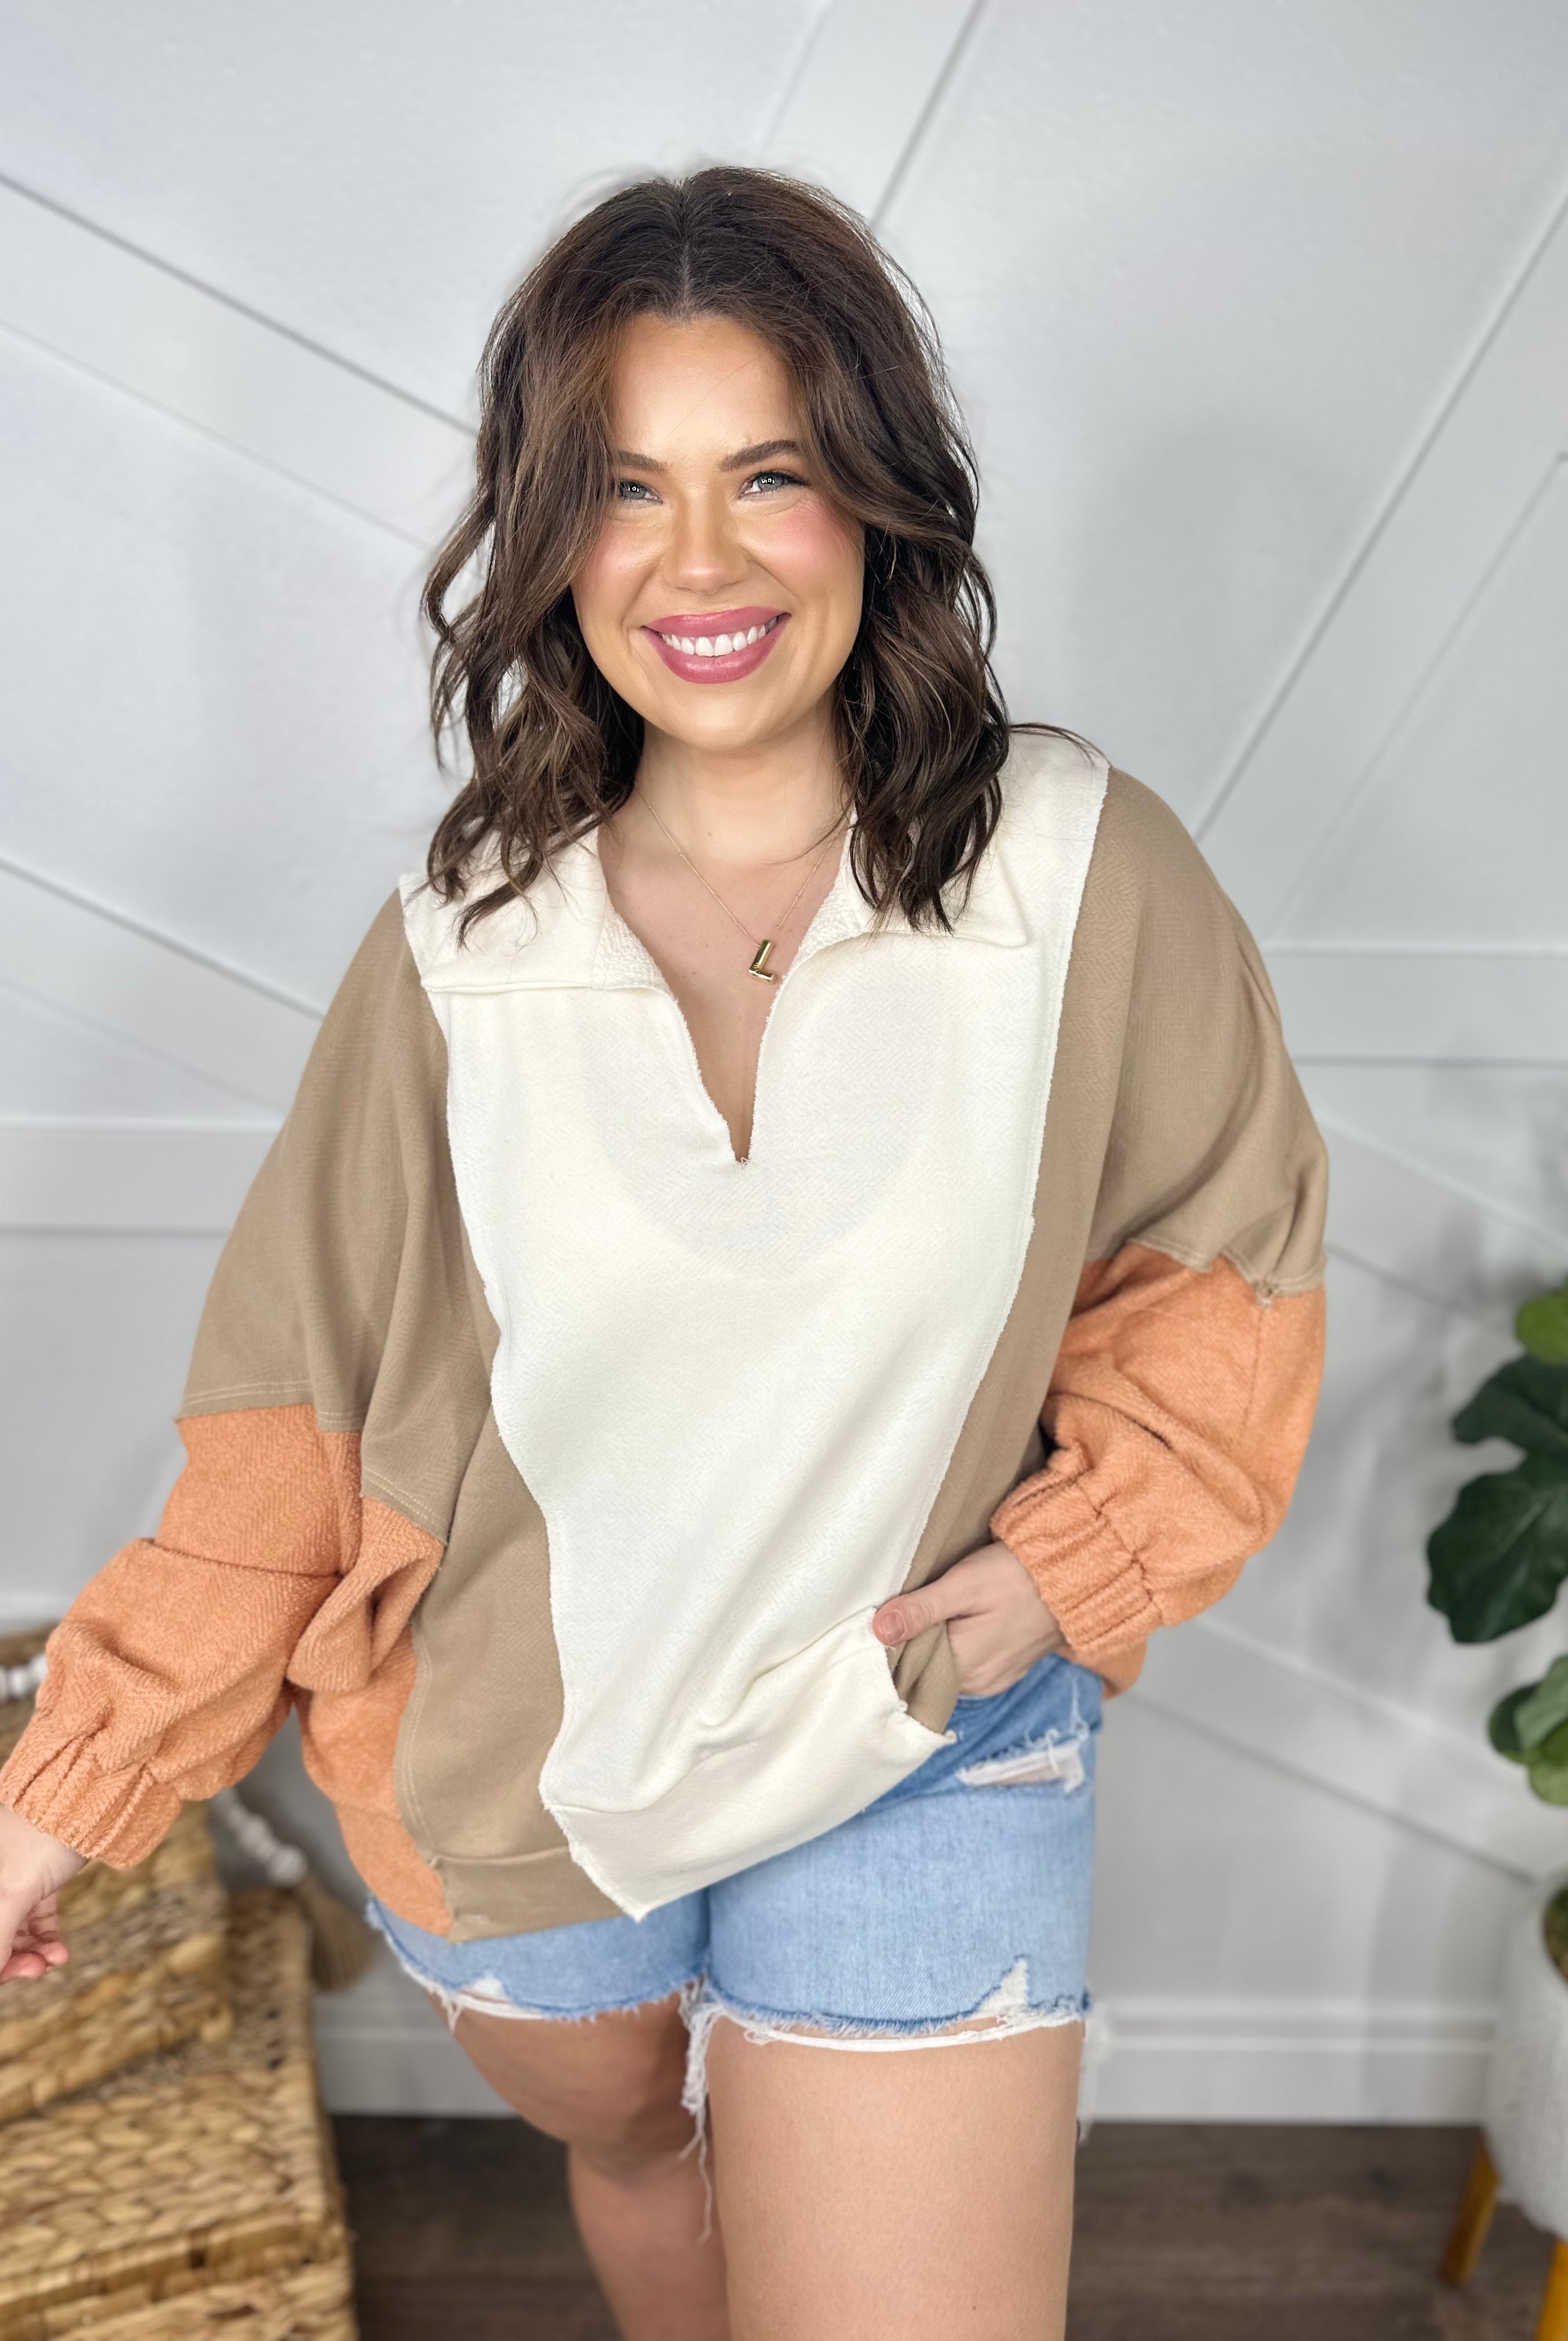 RESTOCK: Stark Contrast Long Sleeve Top-120 Long Sleeve Tops-Bucket List-Heathered Boho Boutique, Women's Fashion and Accessories in Palmetto, FL